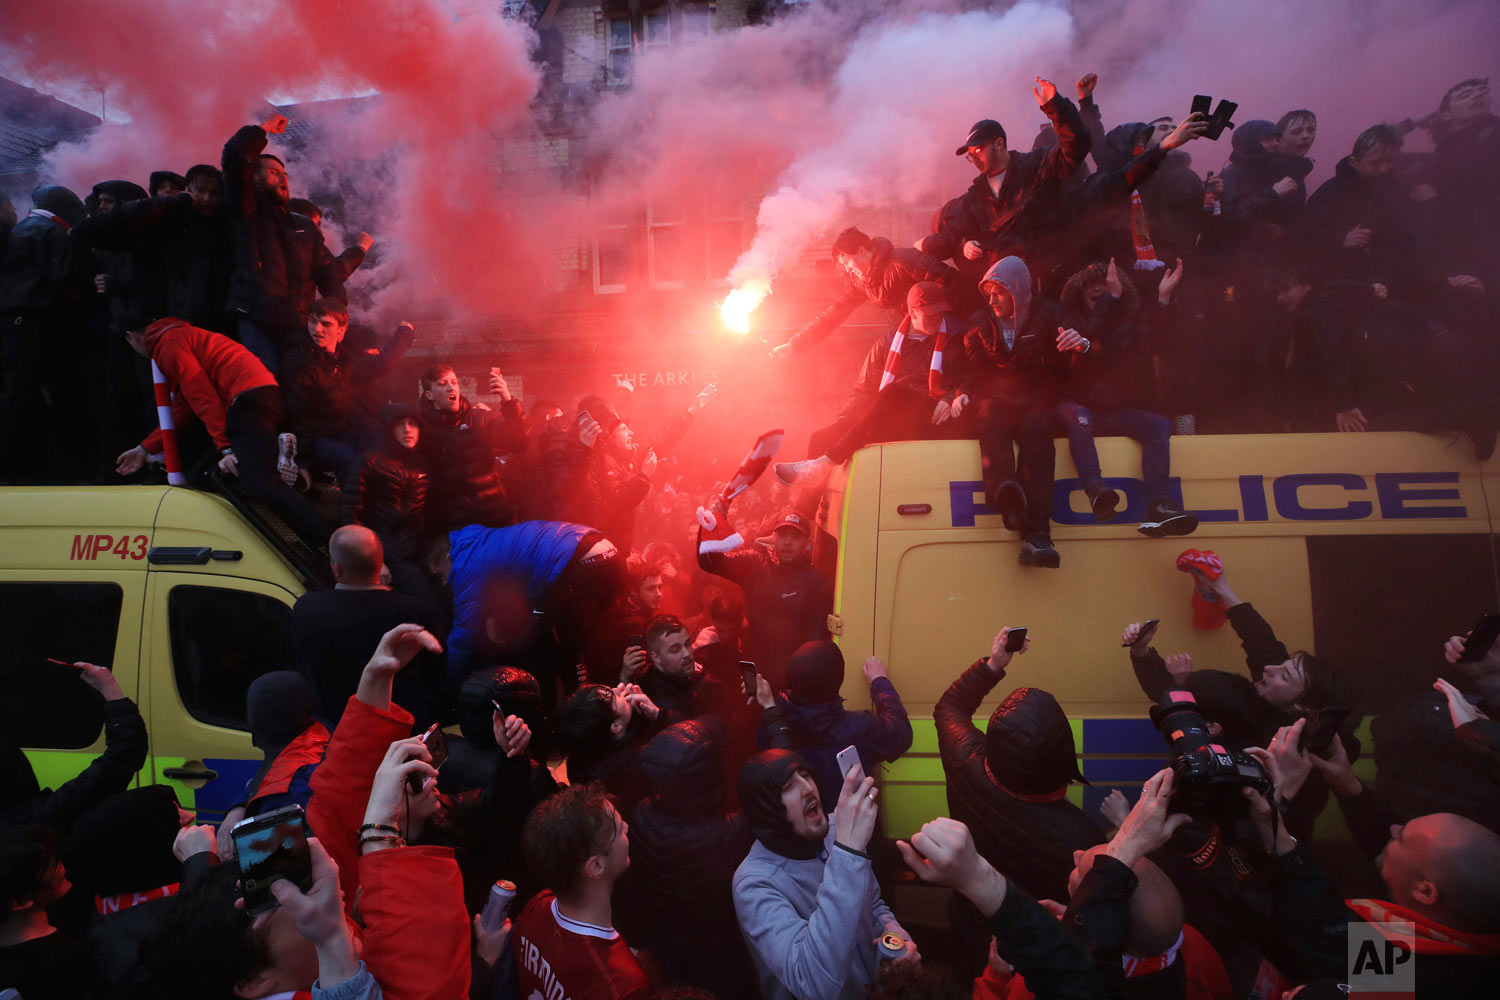  Soccer fans light flares and clamber atop Police vans before their Champions League, Semi Final First Leg soccer match at Anfield in Liverpool, England, Tuesday April 24, 2018. (Peter Byrne/PA via AP) 